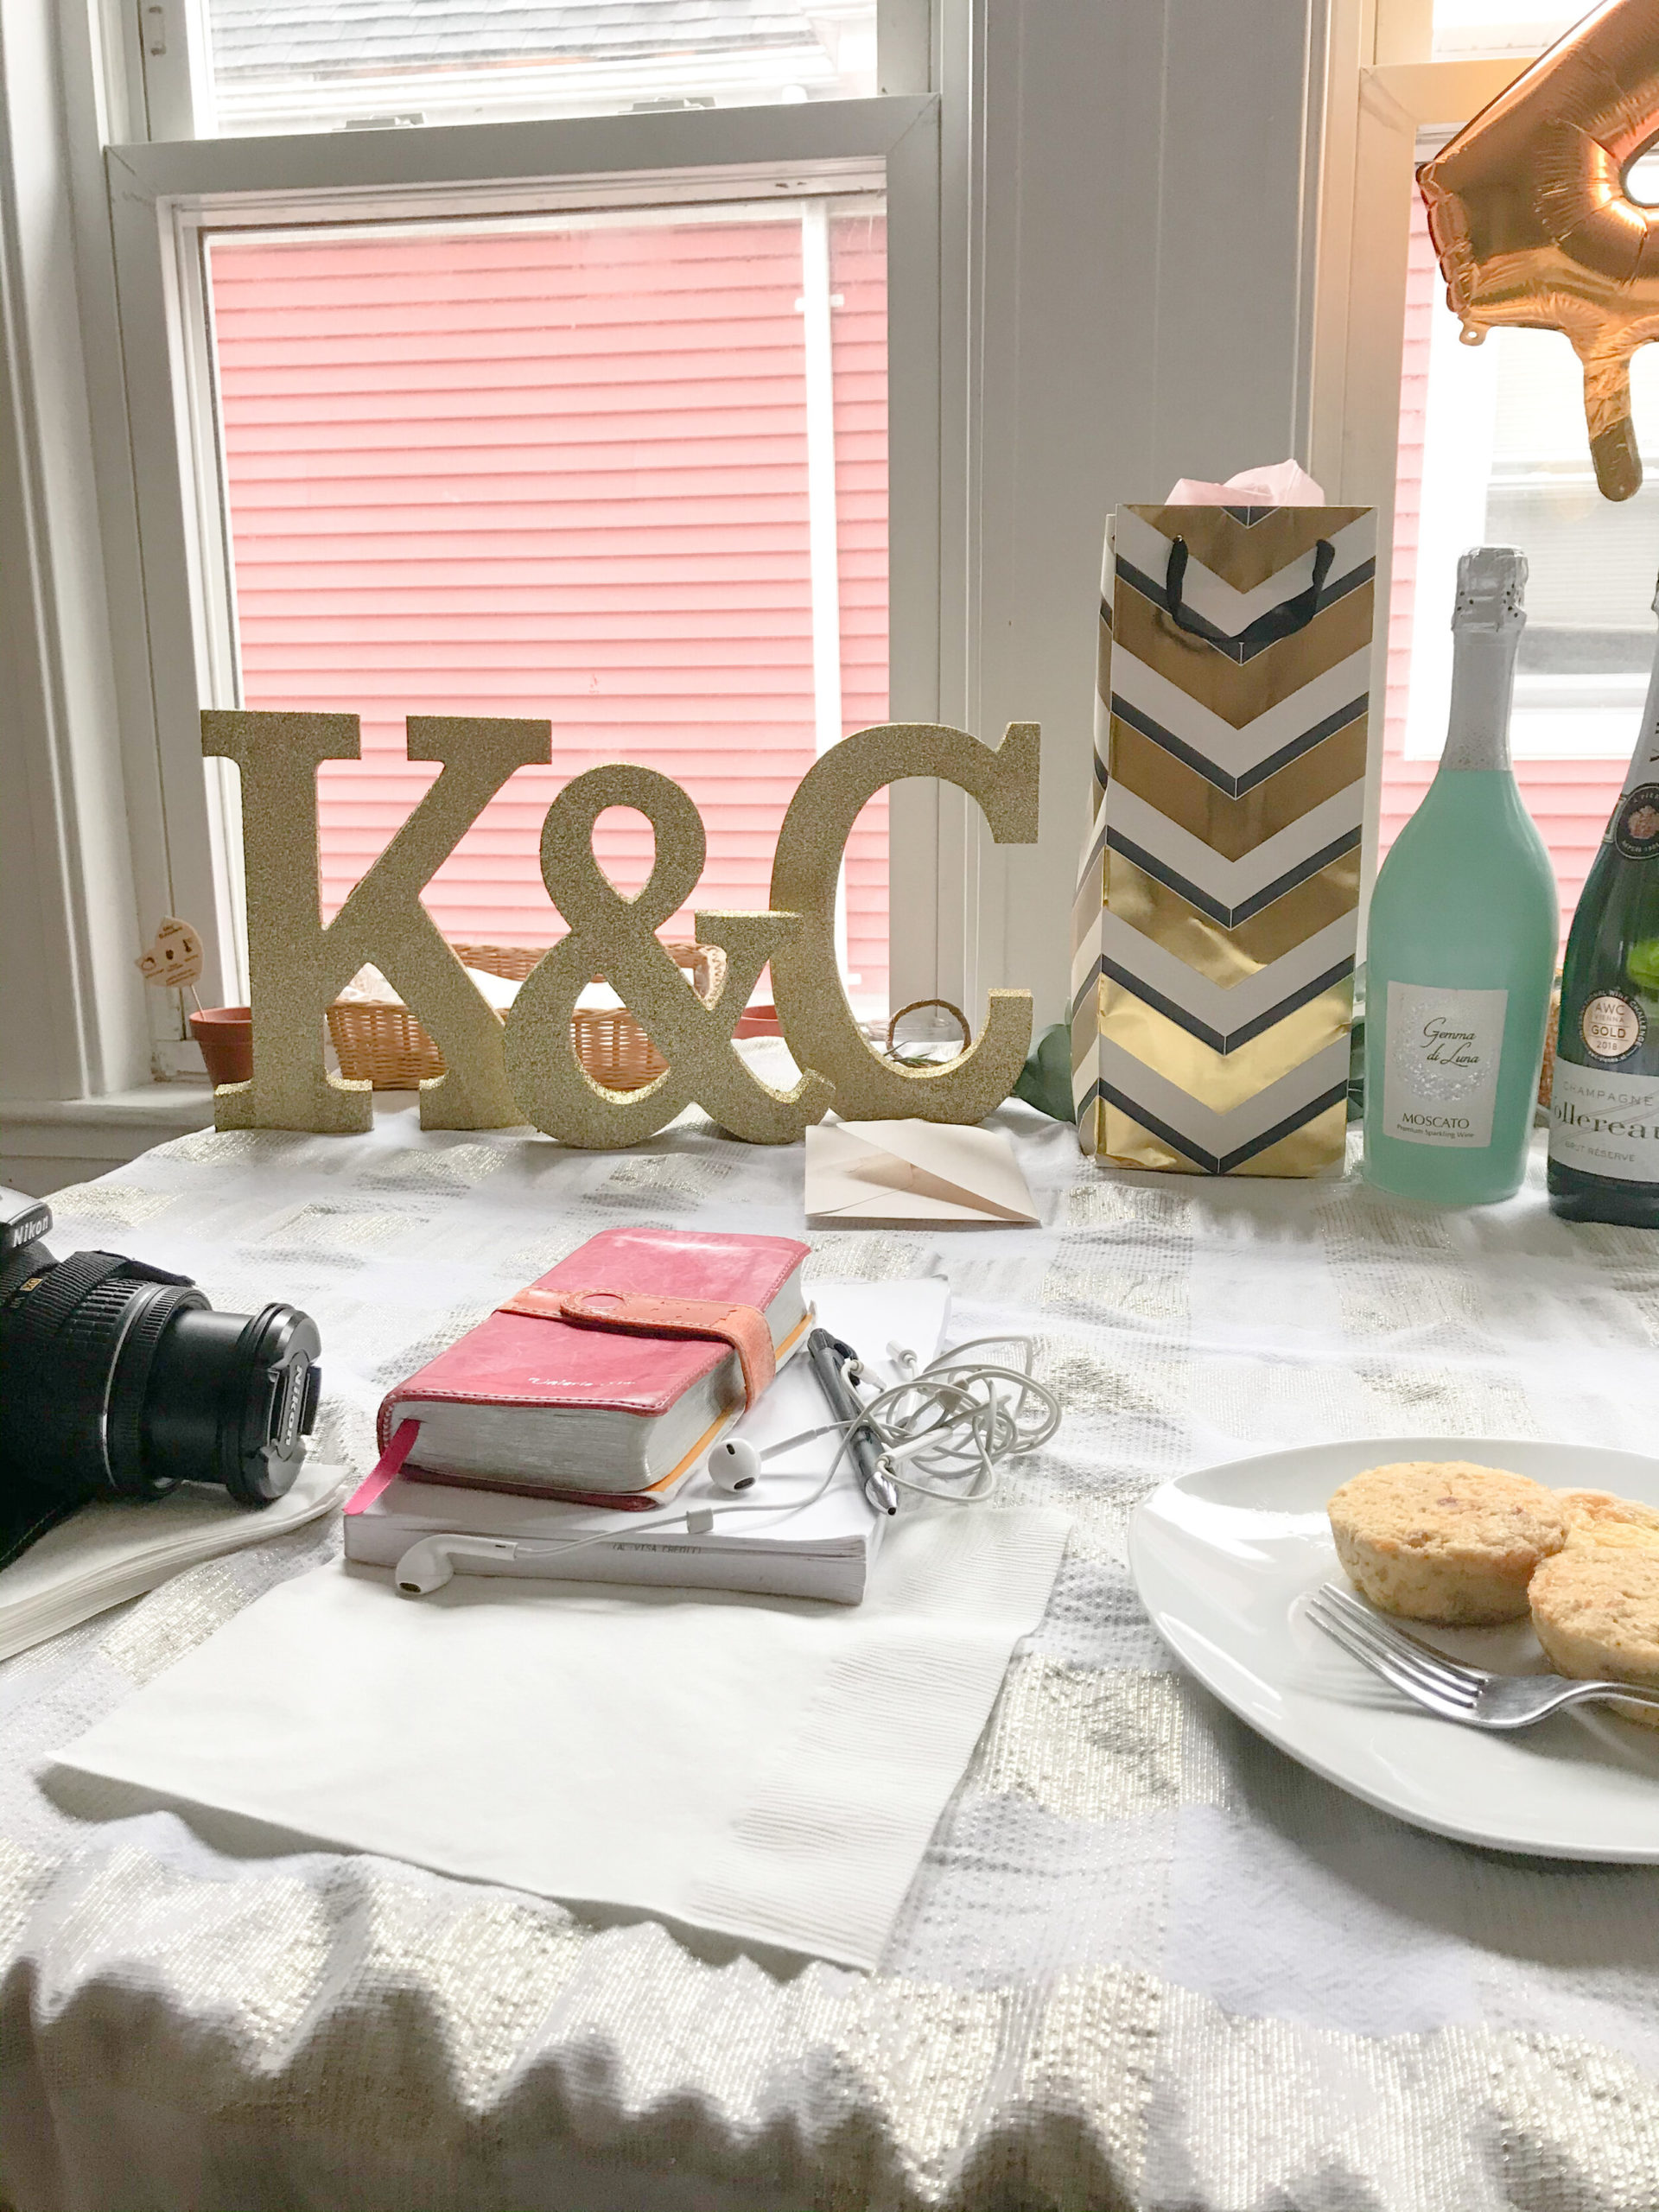 Morning after the  Kindred &amp; Co. launch party  in October 2019. Just me, my planner/journal, Bible, and leftovers. Oh and the champagne gifts.